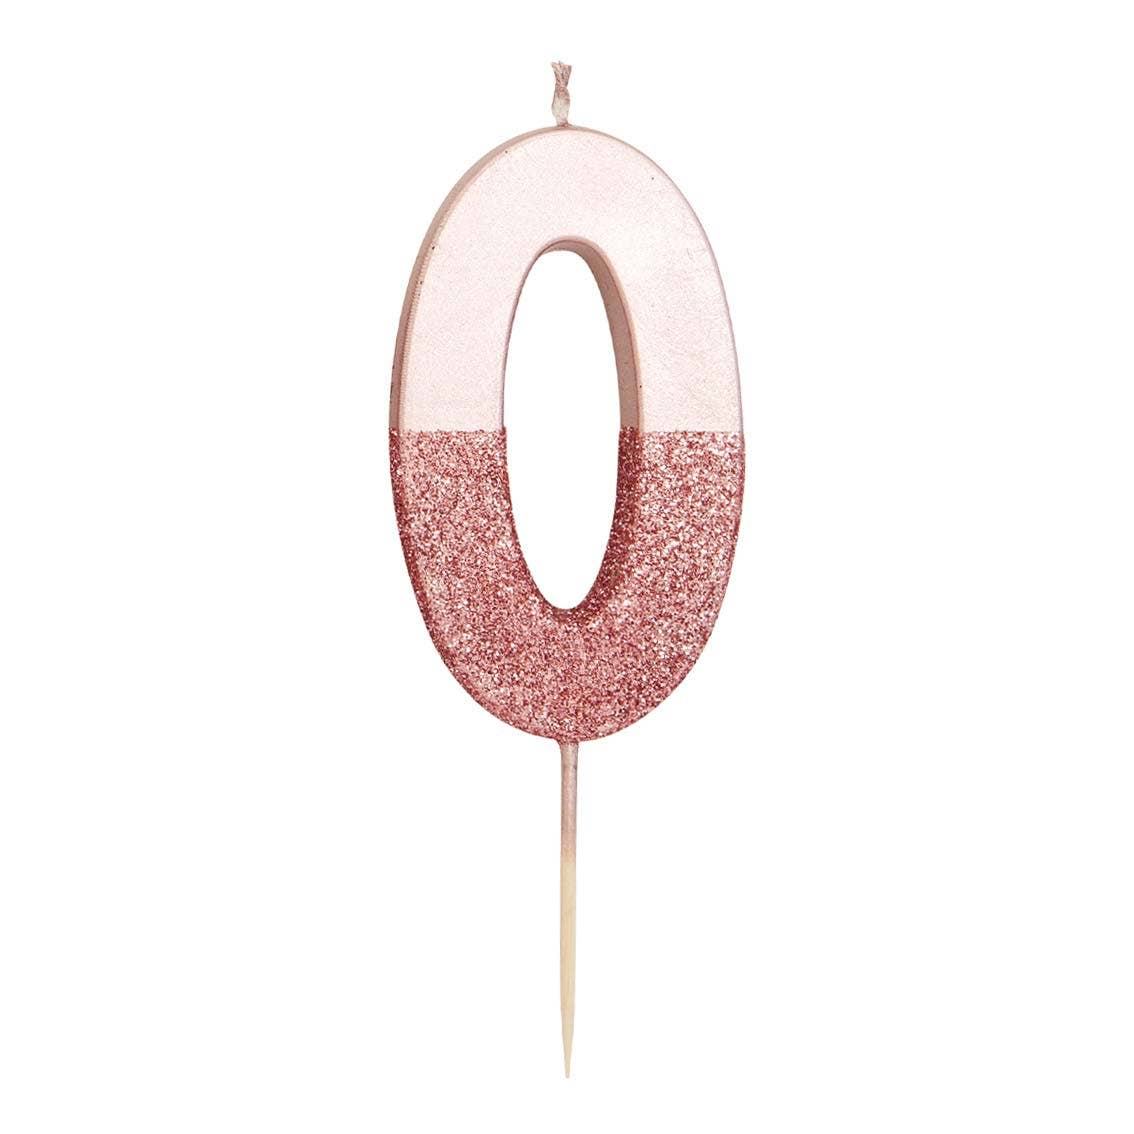 Rose Gold Glitter Dipped Number Candles